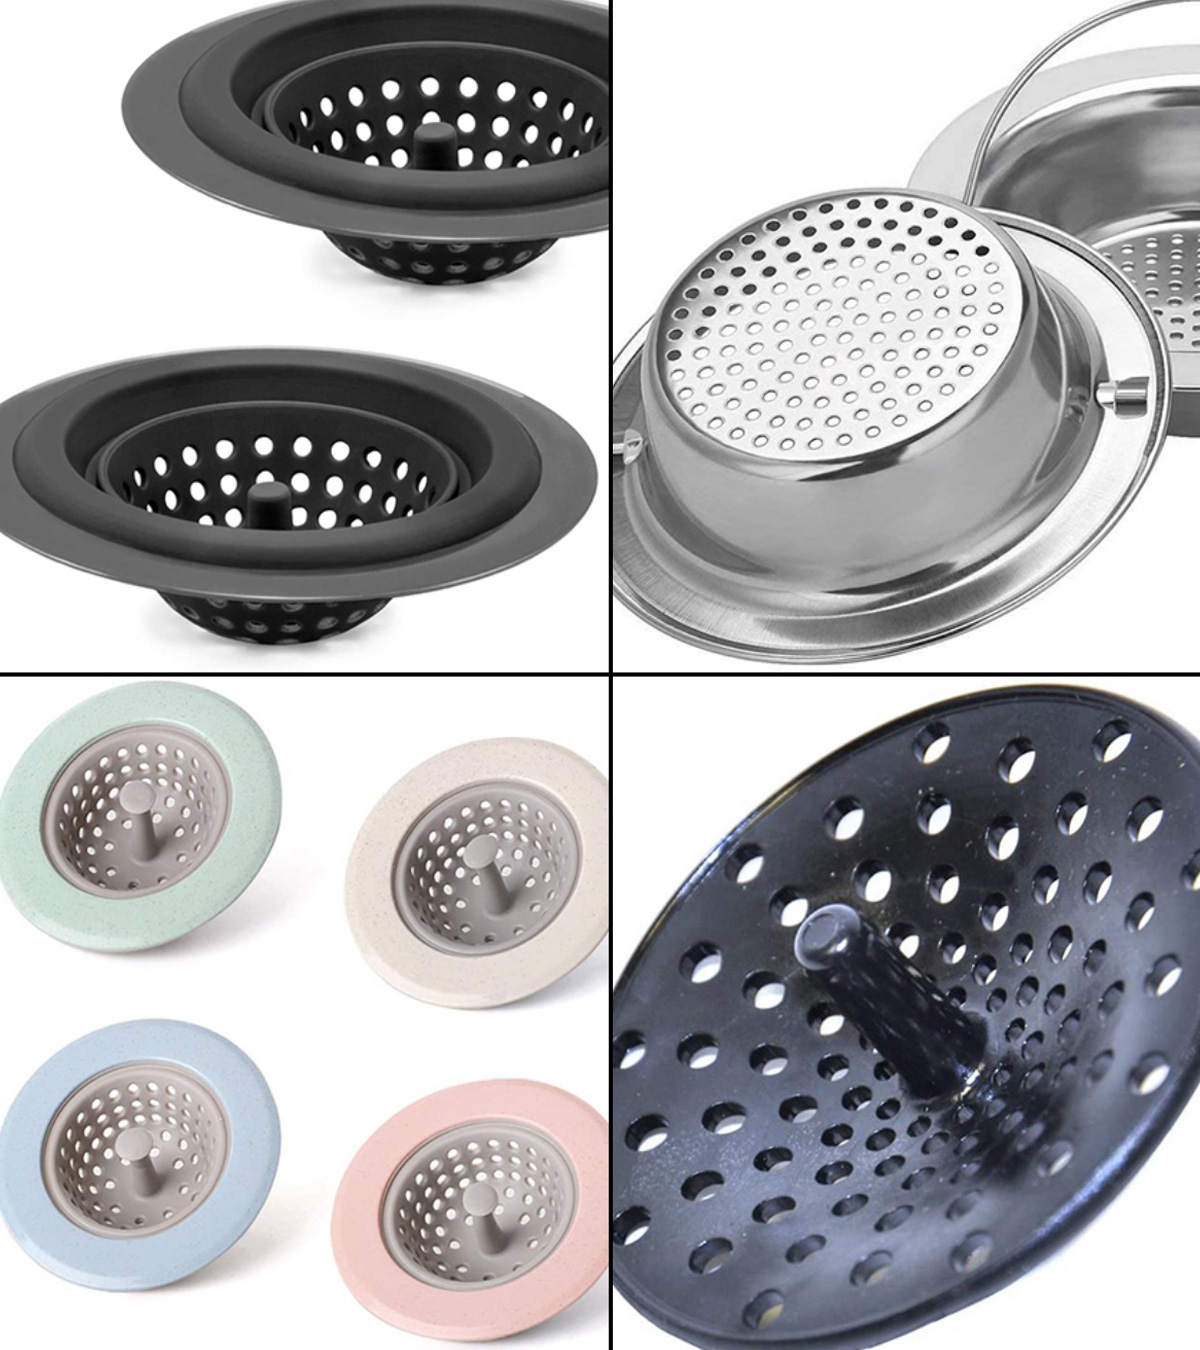 How to Replace a Kitchen Sink Basket Strainer (DIY)